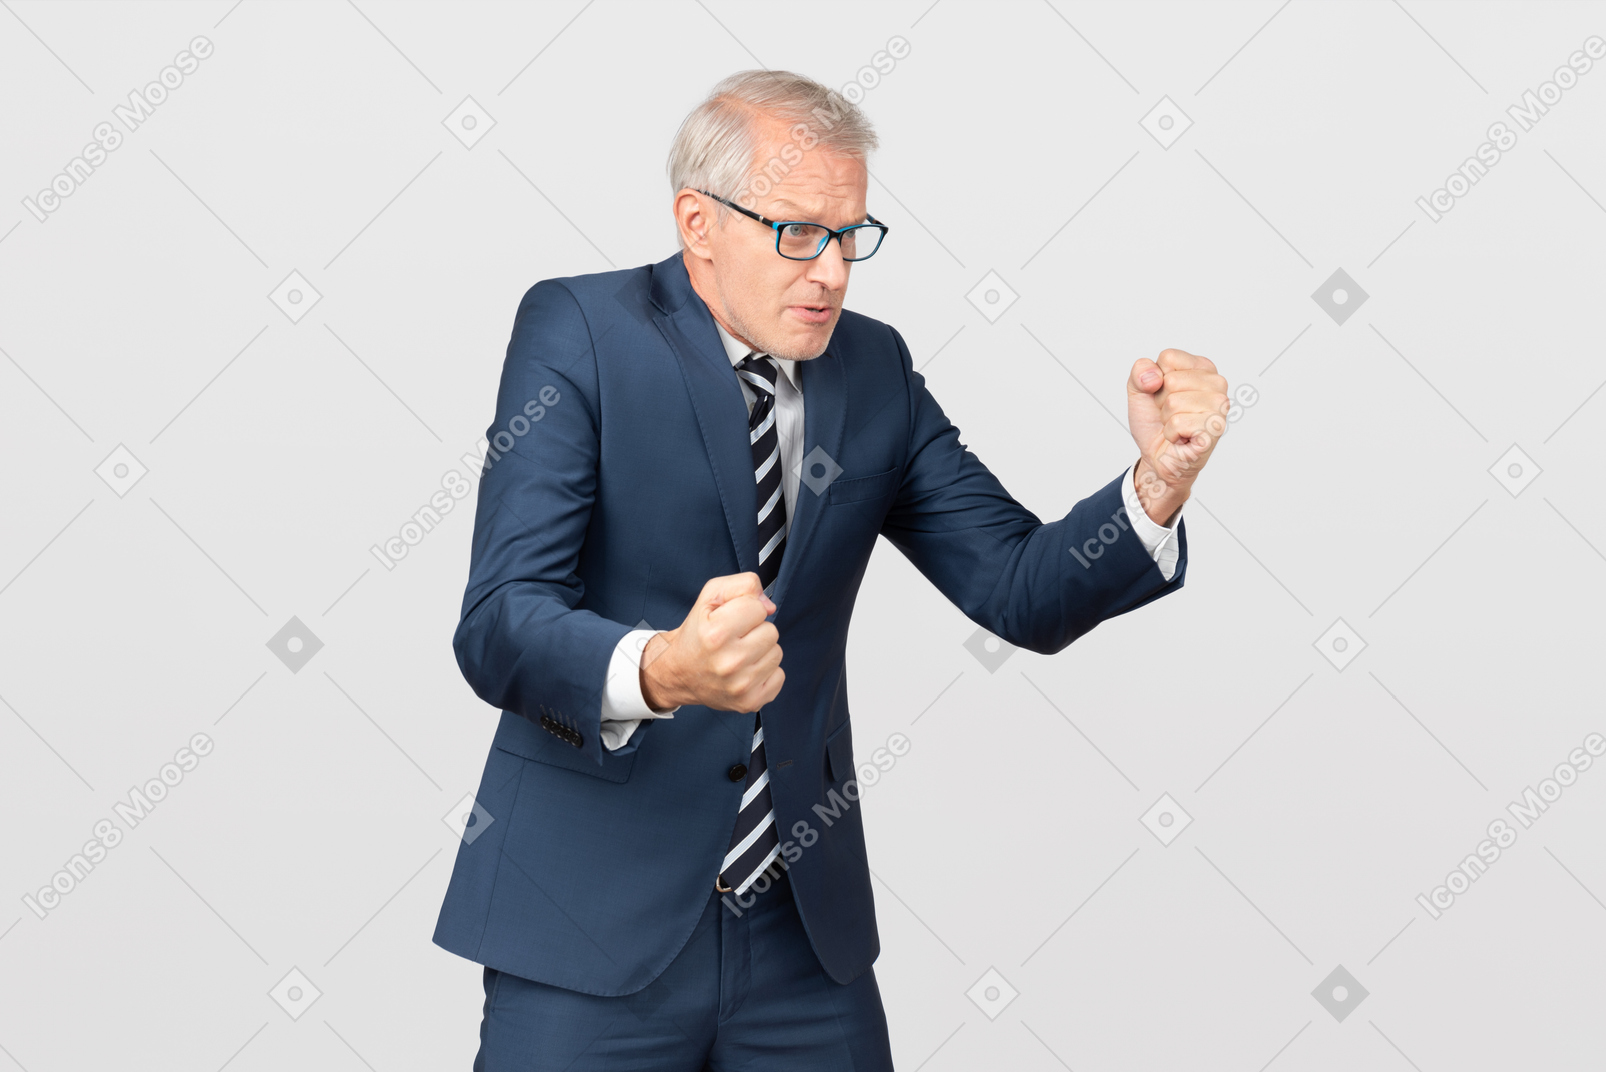 Angry mature businessman holding clenched fists up